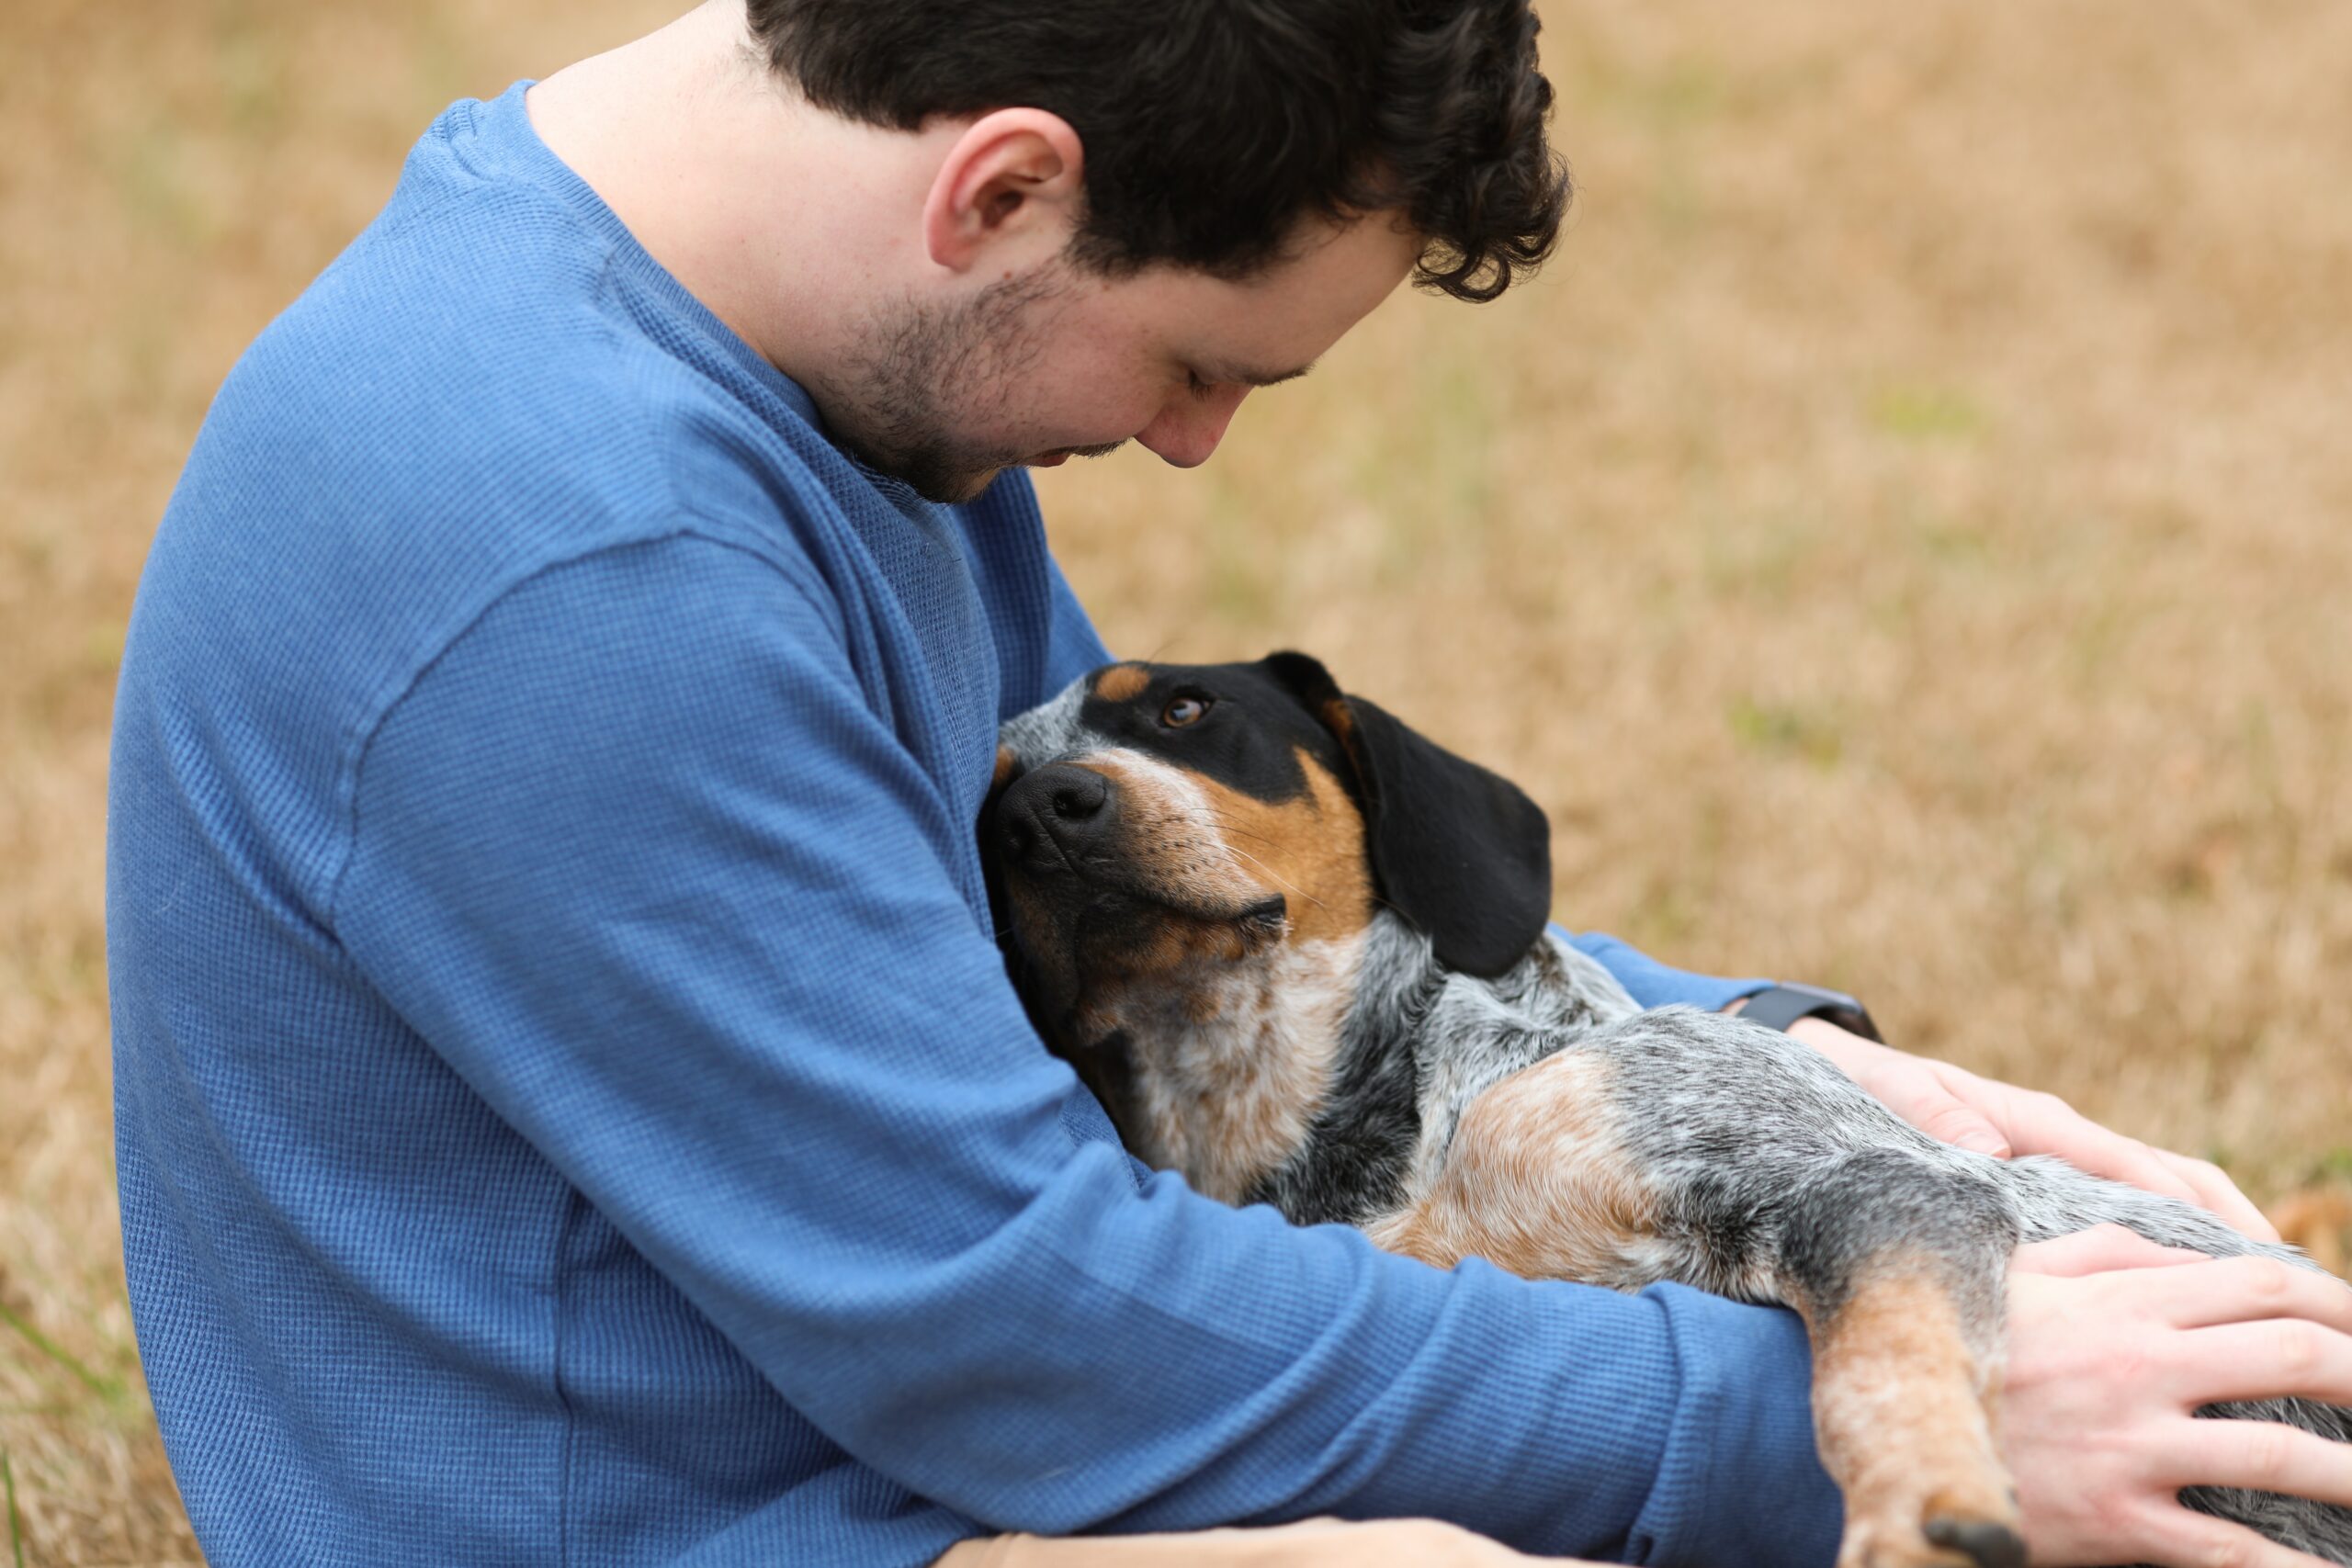 The Furry Factor: The Unseen Benefits of Pet Companionship in Overcoming Addiction